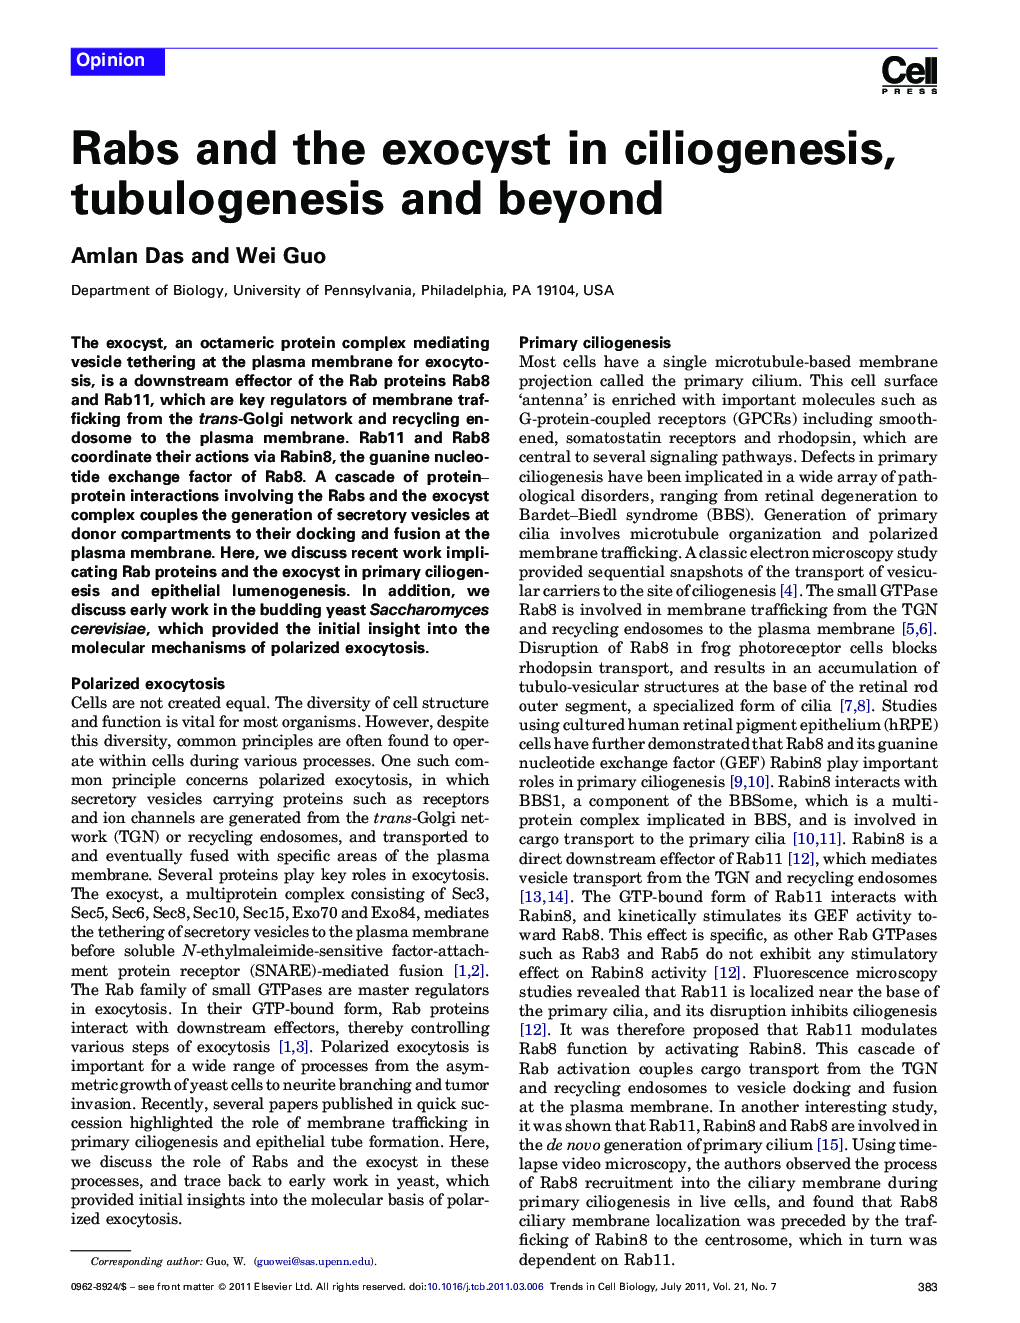 Rabs and the exocyst in ciliogenesis, tubulogenesis and beyond